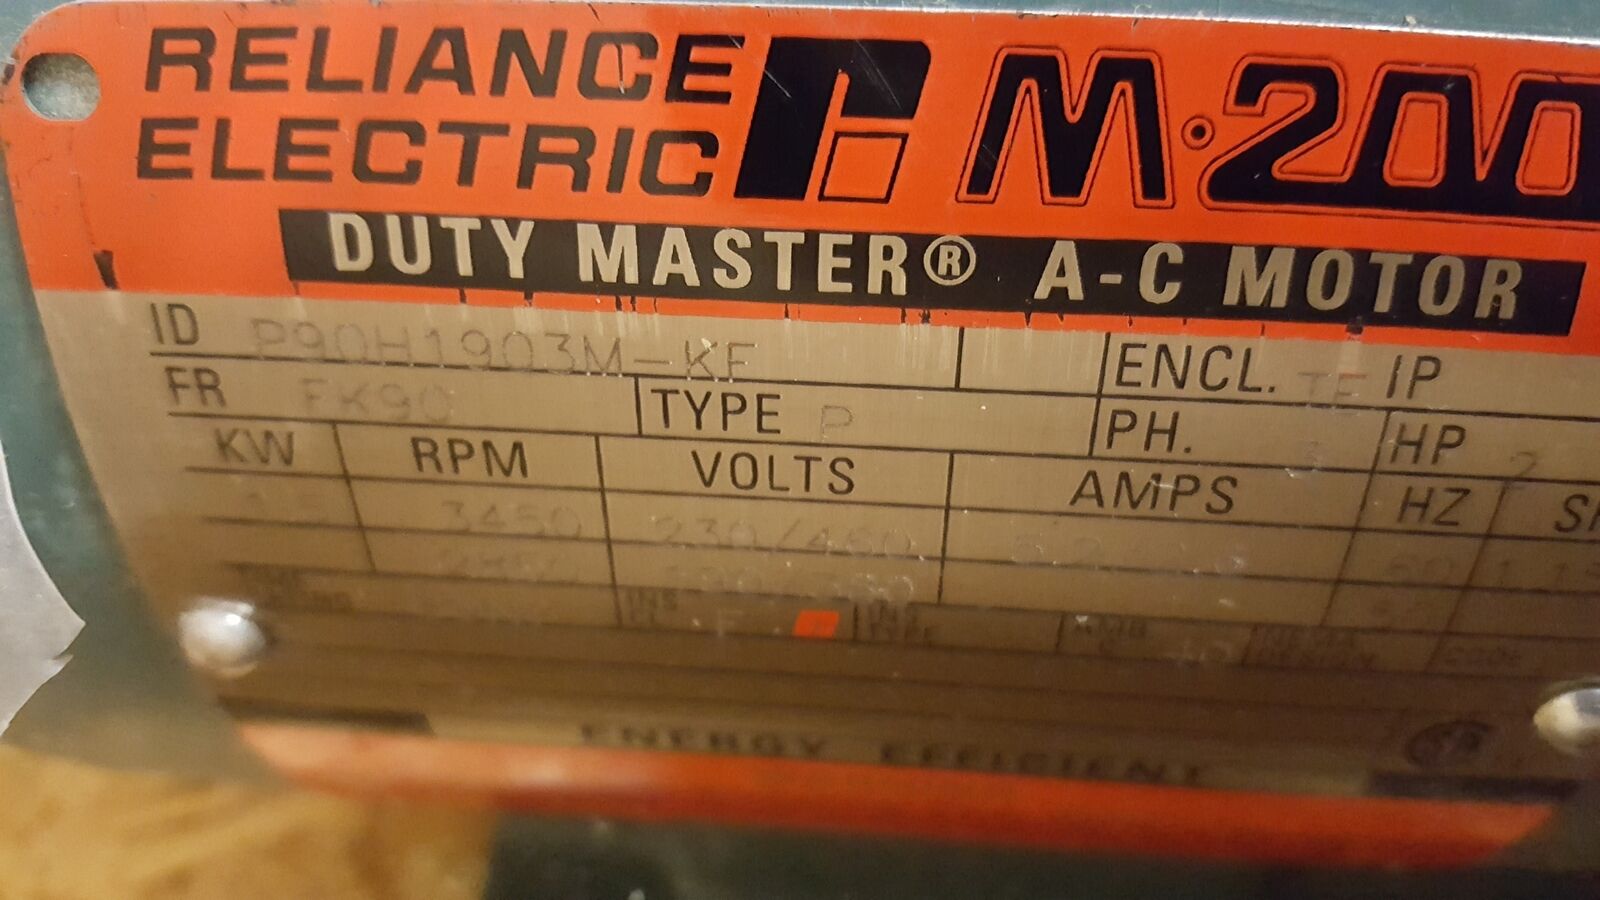 Reliance Electric P90h1903m-kf Moteur 2hp 3450 RPM Neuf 